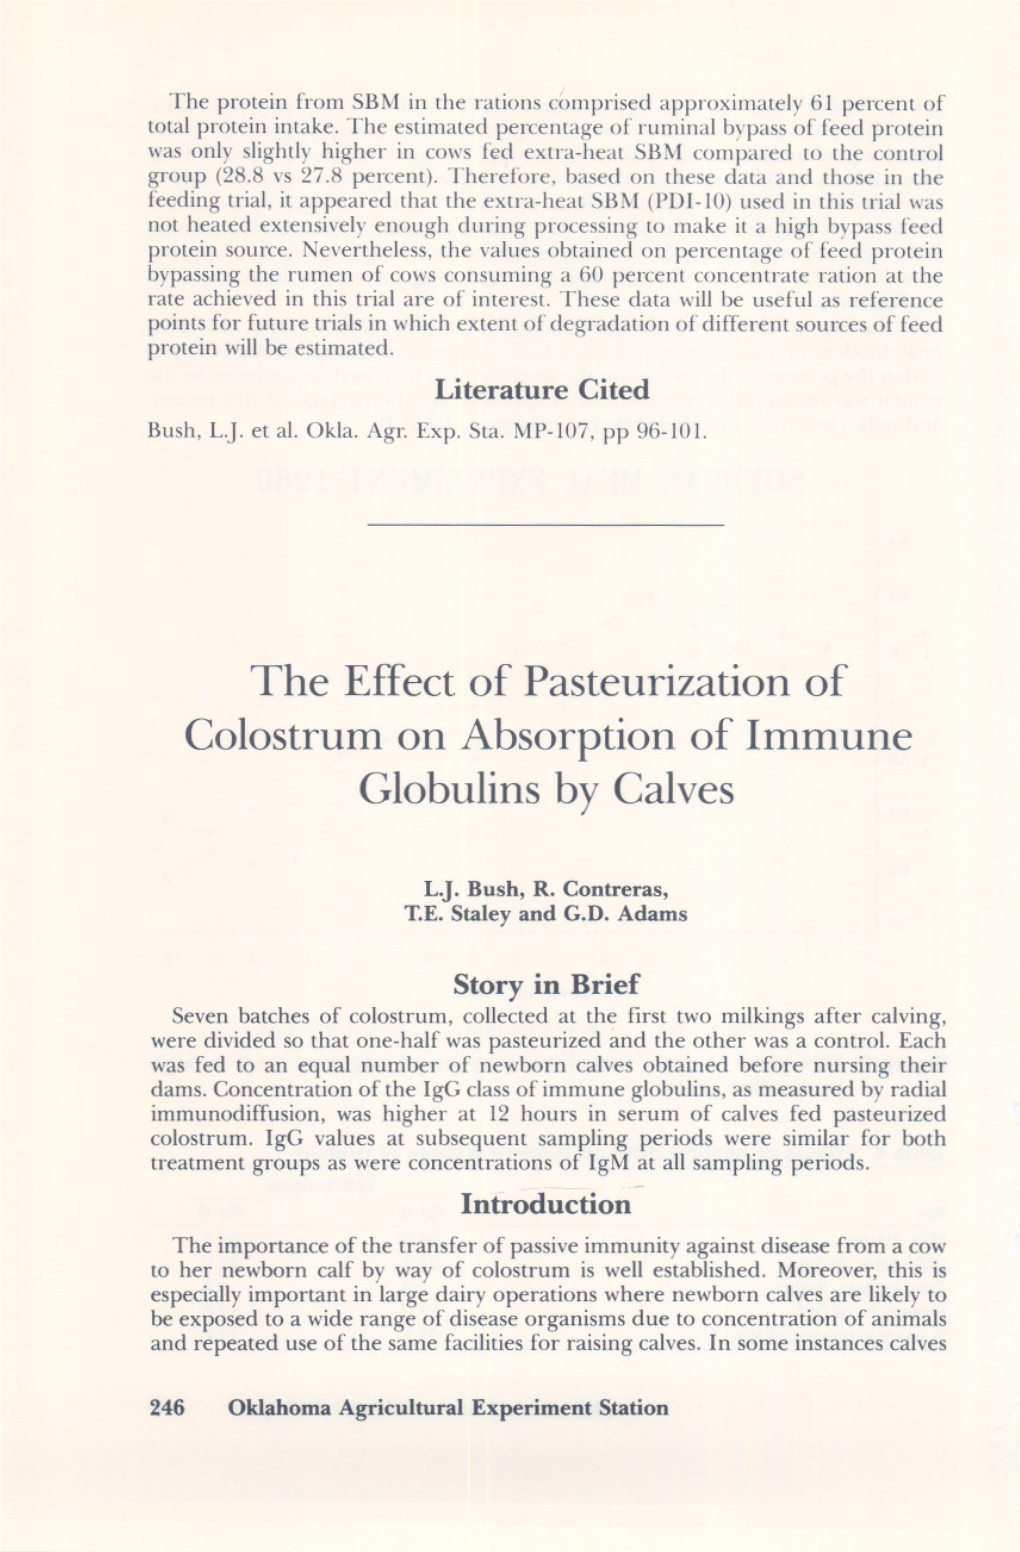 The Effect of Pasteurization of Colostrum on Absorption of Immune Globulins by Calves